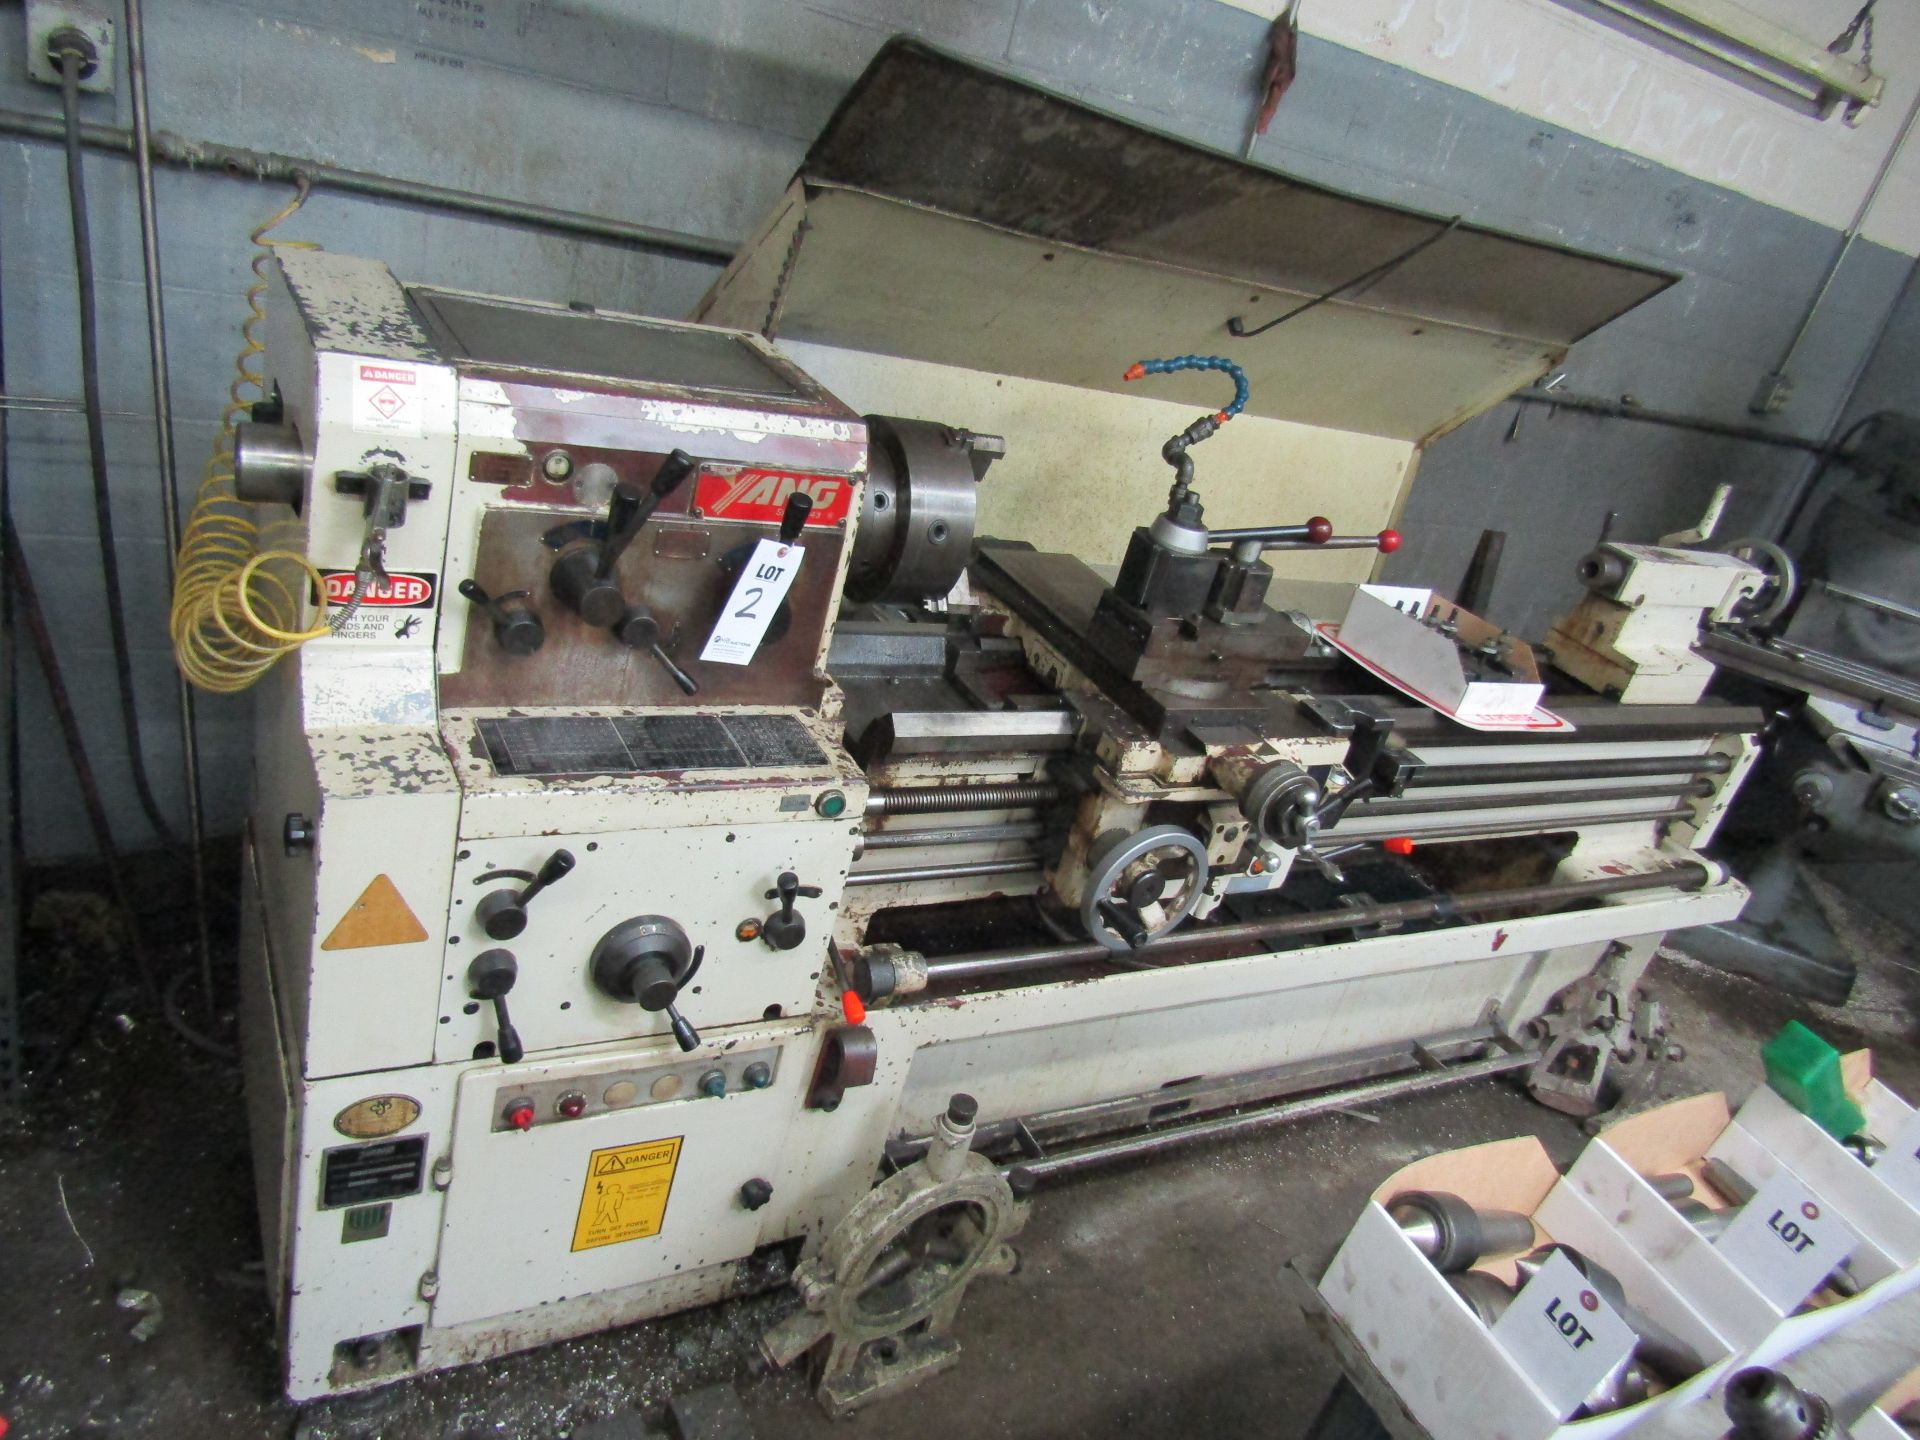 1995 YANG ENGINE LATHE, MODEL YANG-CL48150G, SERIAL B92668, WITH ASSOCIATED TOOL HOLDERS AND TOOLING